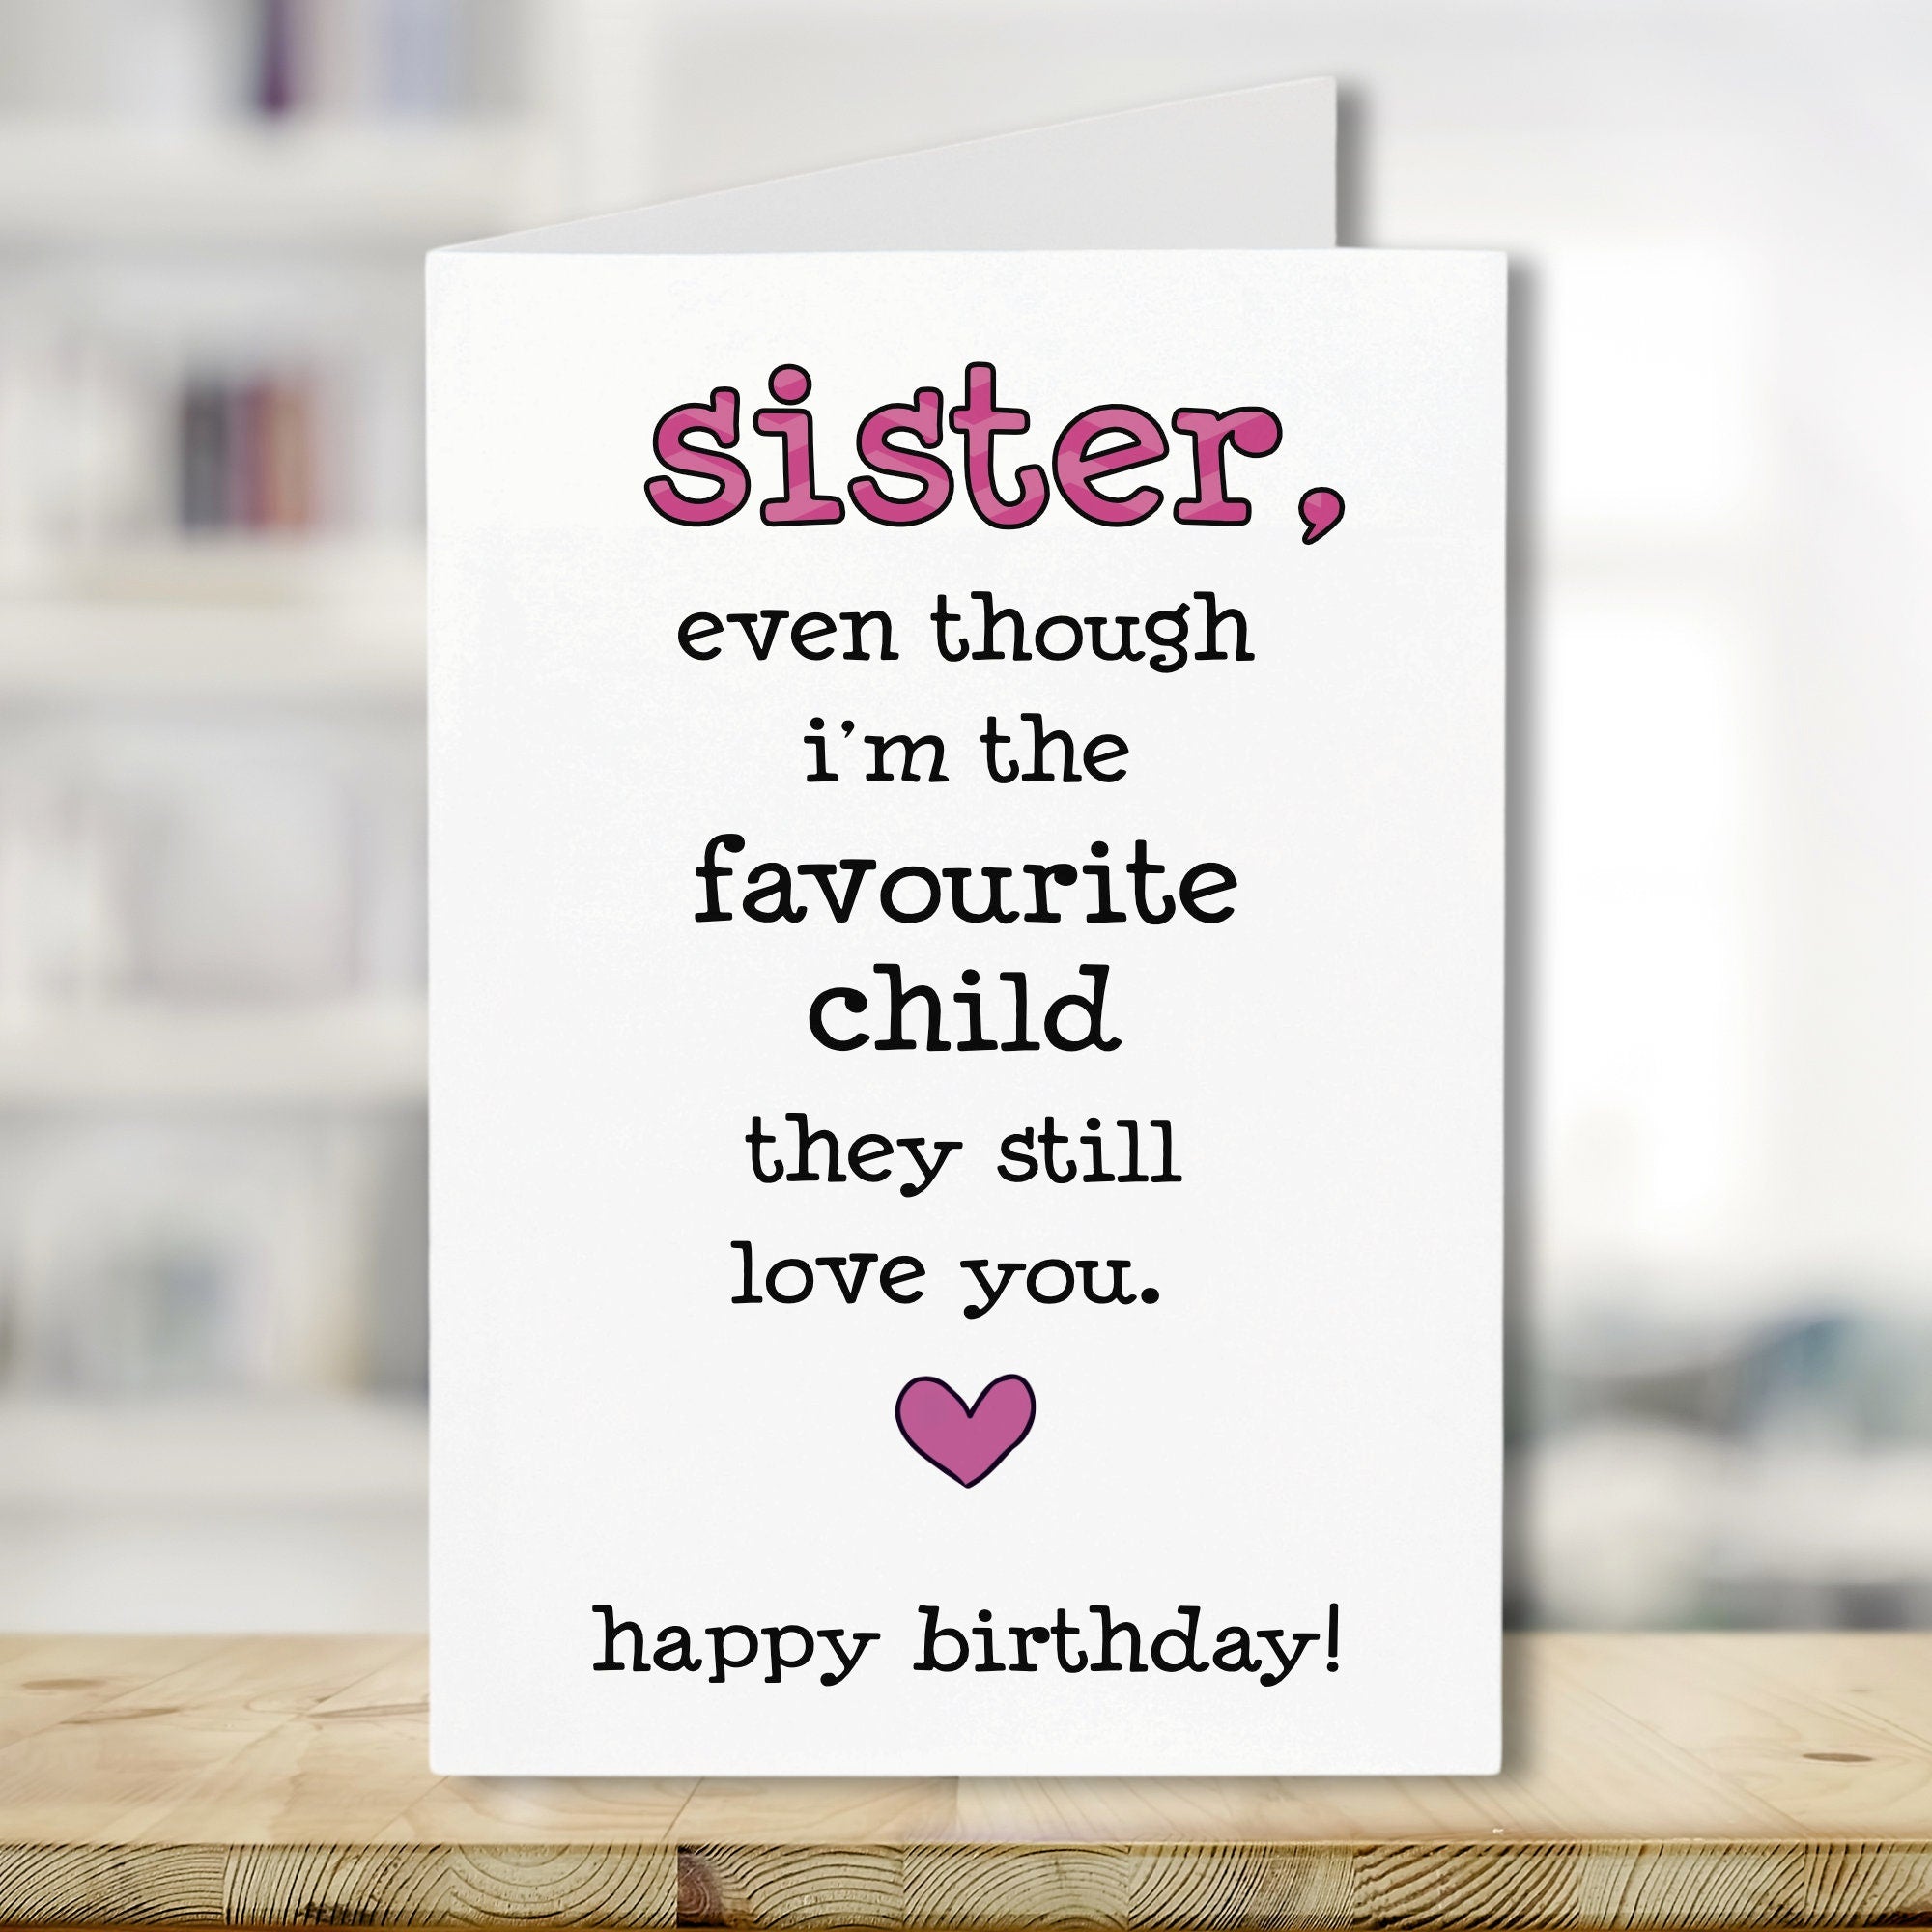 Funny Sister Birthday Card, Sister Even Though I'm The Favourite Child They Still Love You, Funny Birthday Card, For Sister, Cheeky, Banter